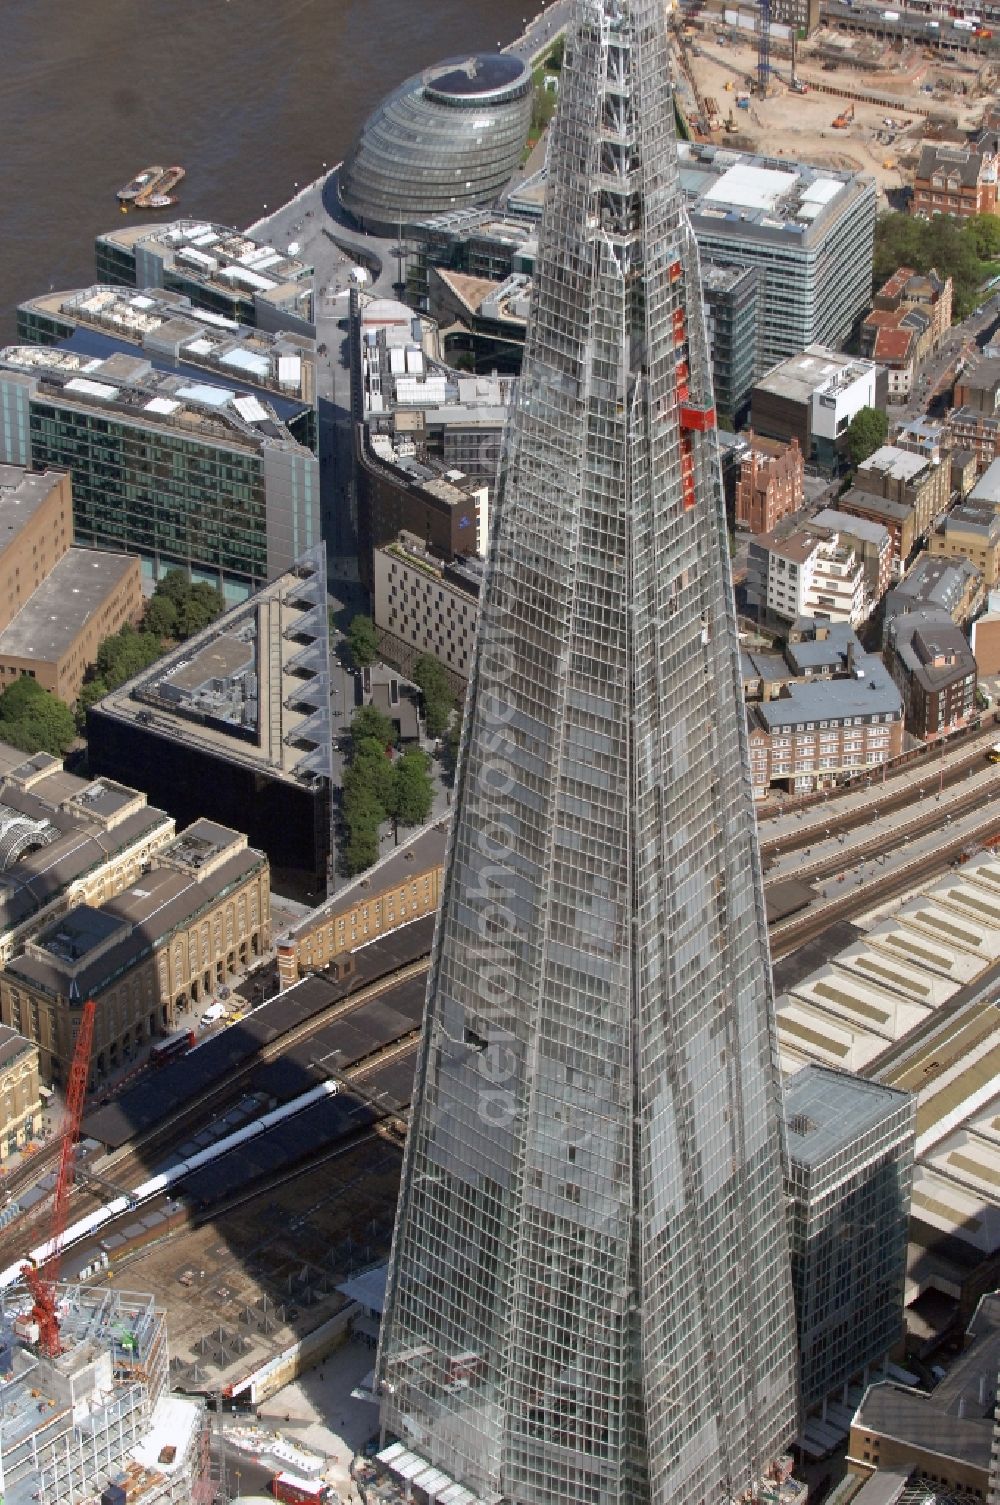 Aerial photograph London - View The Shard - Europe's tallest building. The high-rise occurs at the London Bridge Station. The Shard London Bridge (formerly known as London Bridge Tower, and Shard of Glass) is a skyscraper under construction in London, which will be on its completion as it stood at 310 meters, the second tallest building in Europe